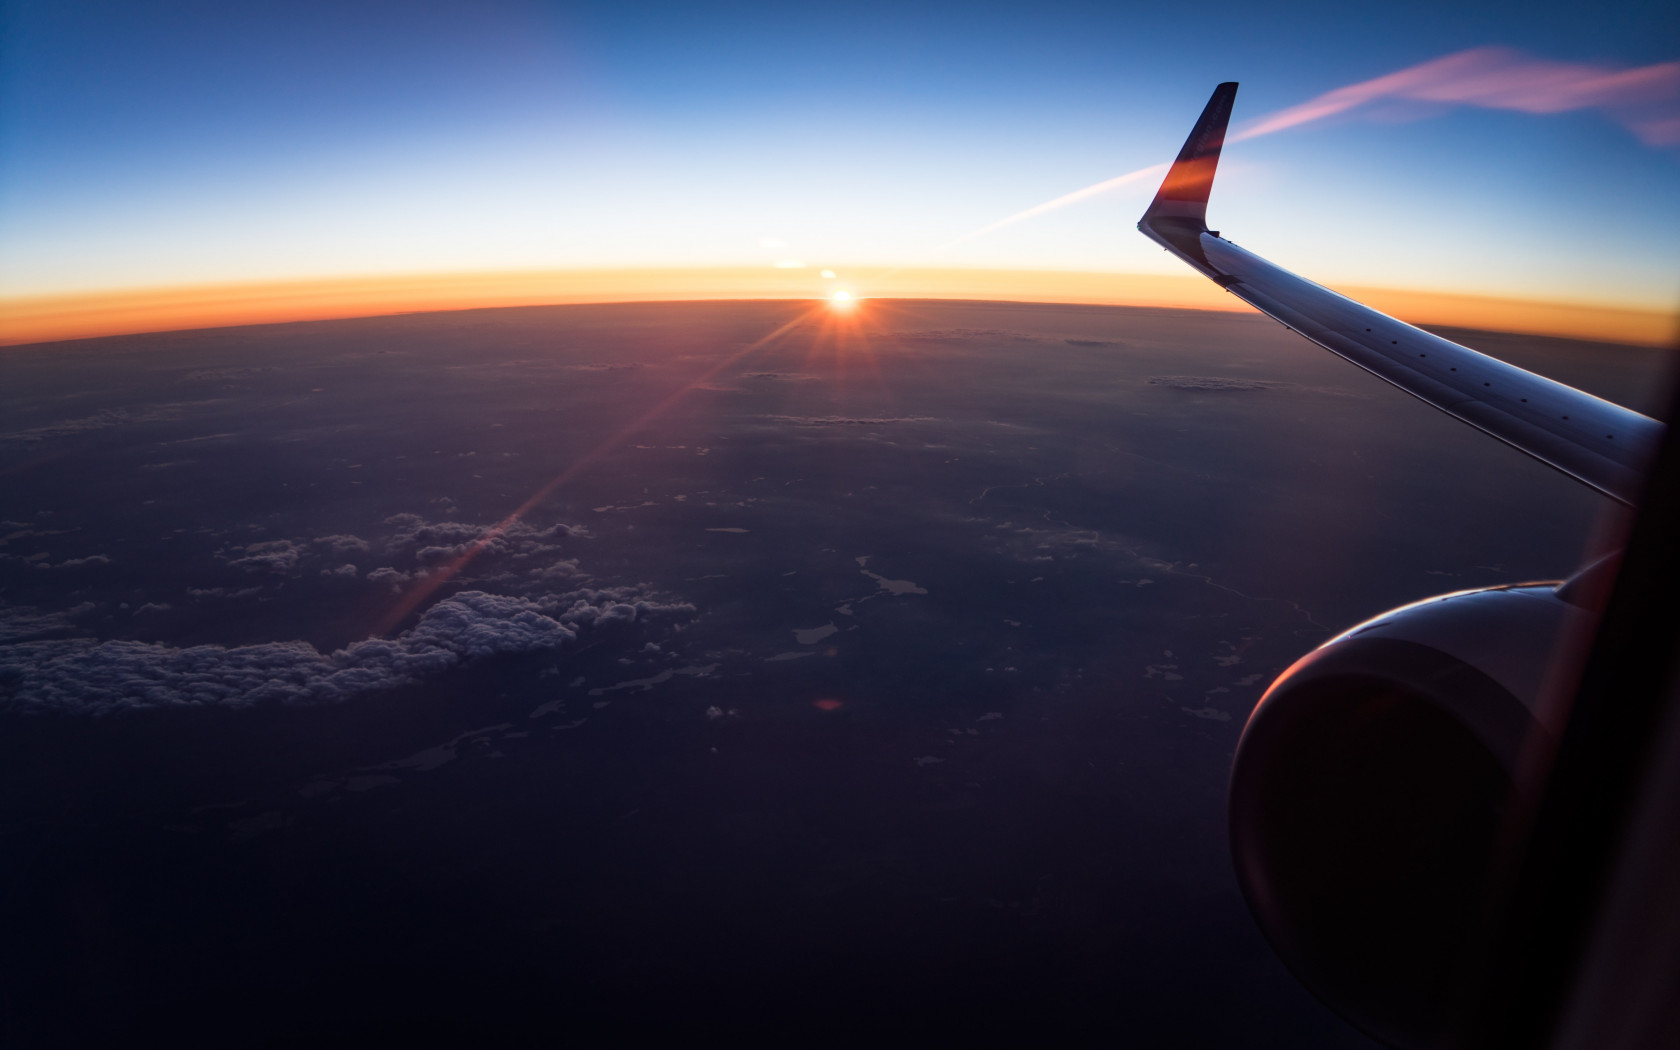 In the plane watching the sunset wallpaper 1680x1050